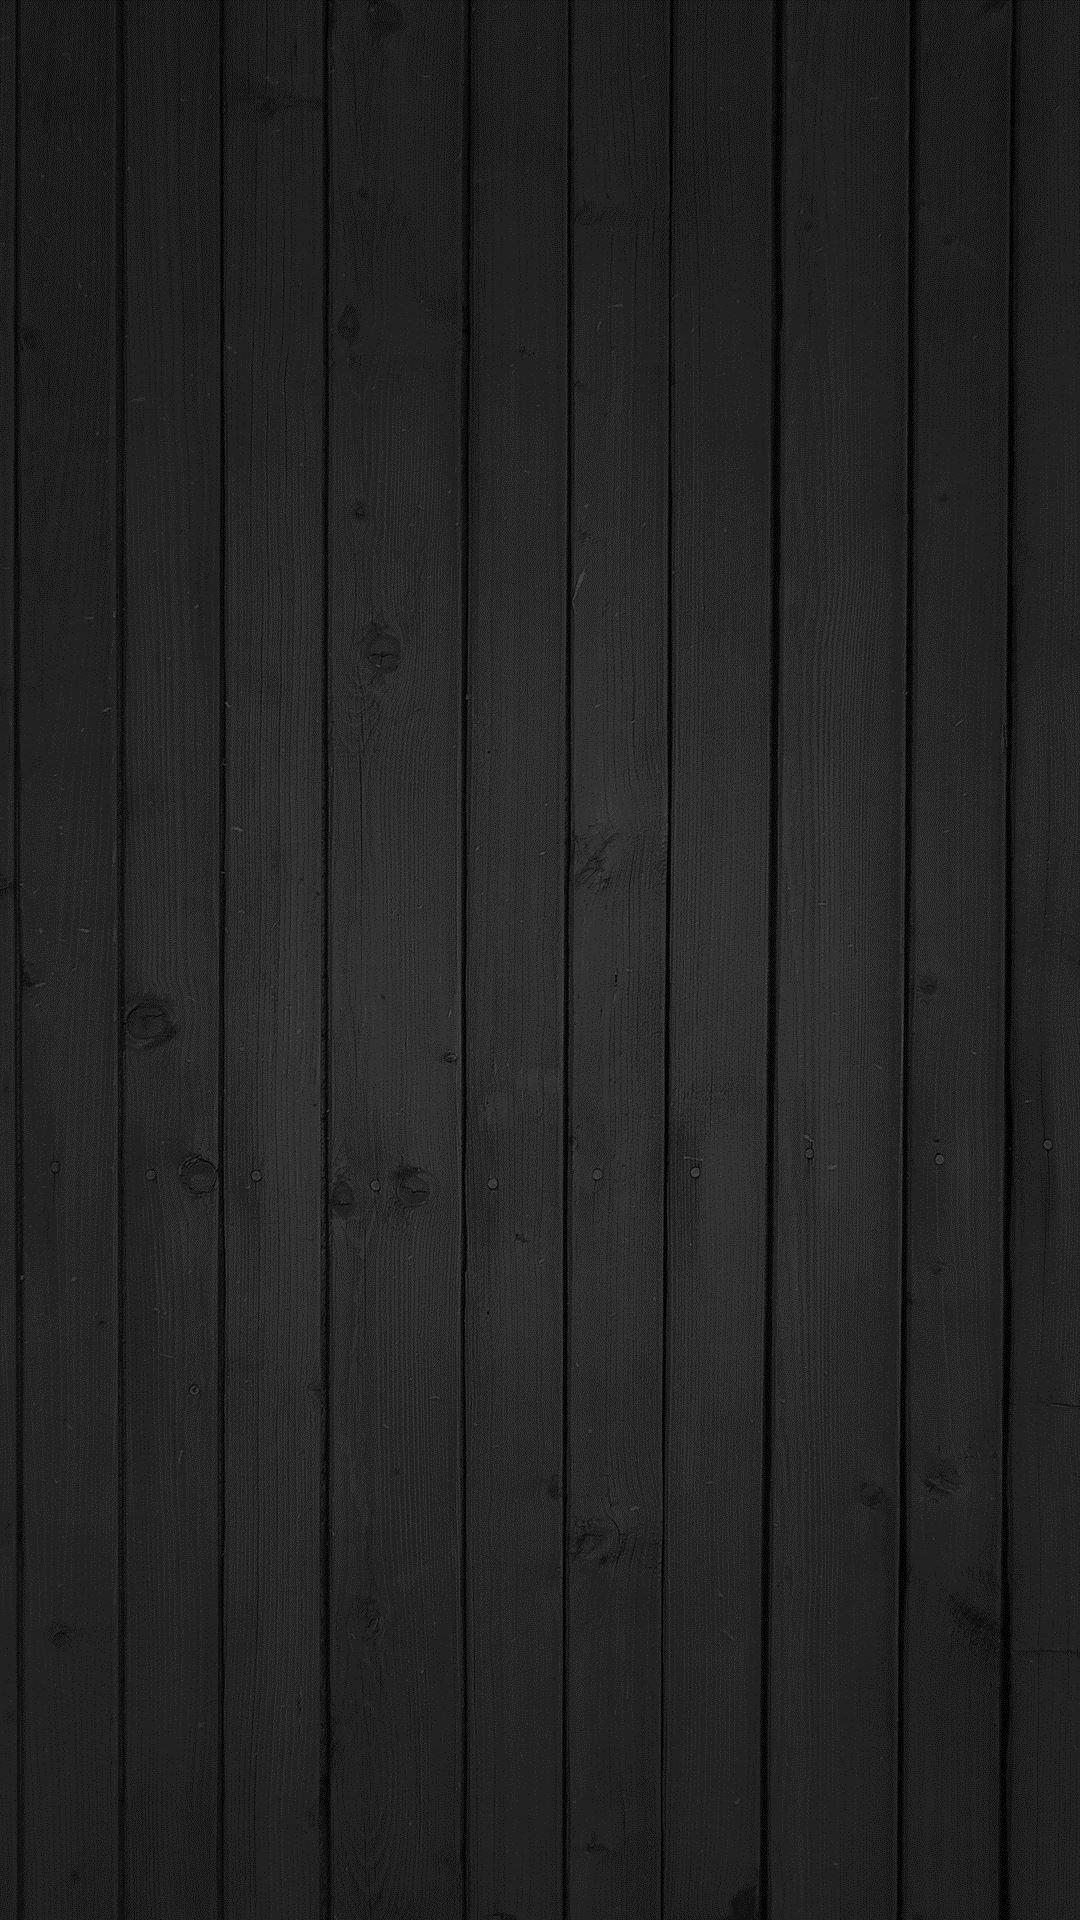 Creative Textures iPhone Wallpaper Free To Download